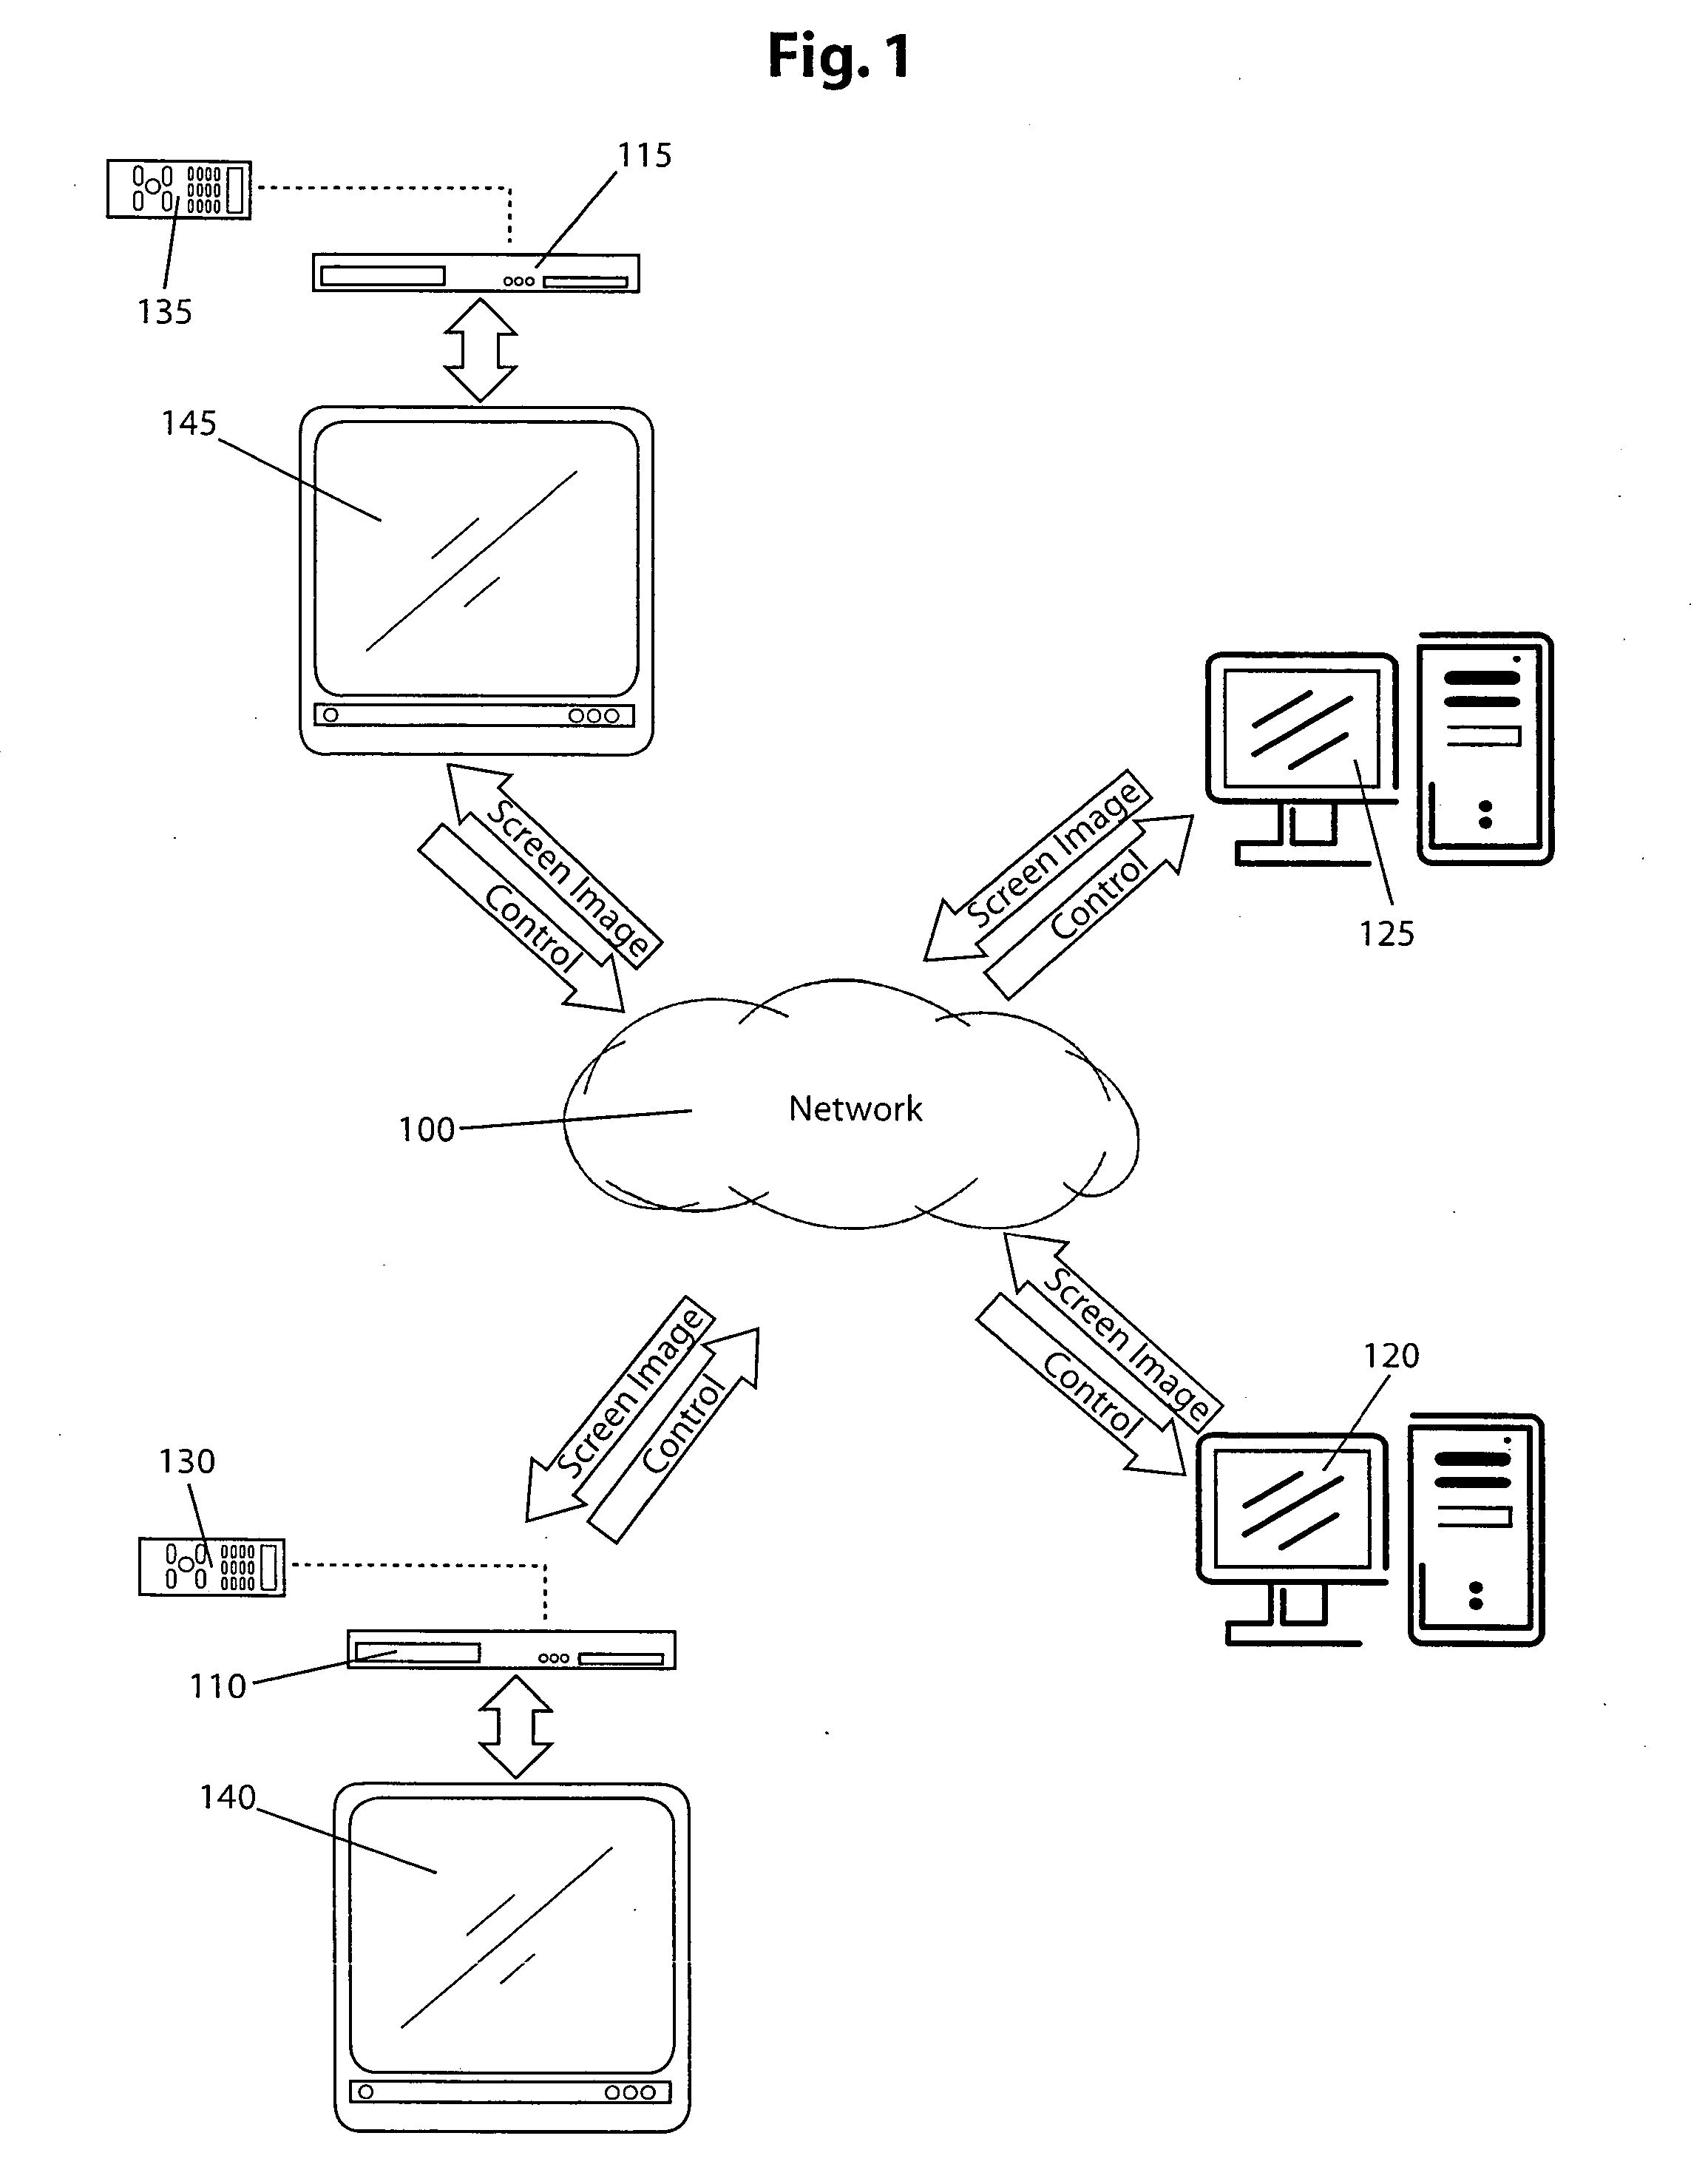 System and method for viewing and controlling a personal computer using a networked television